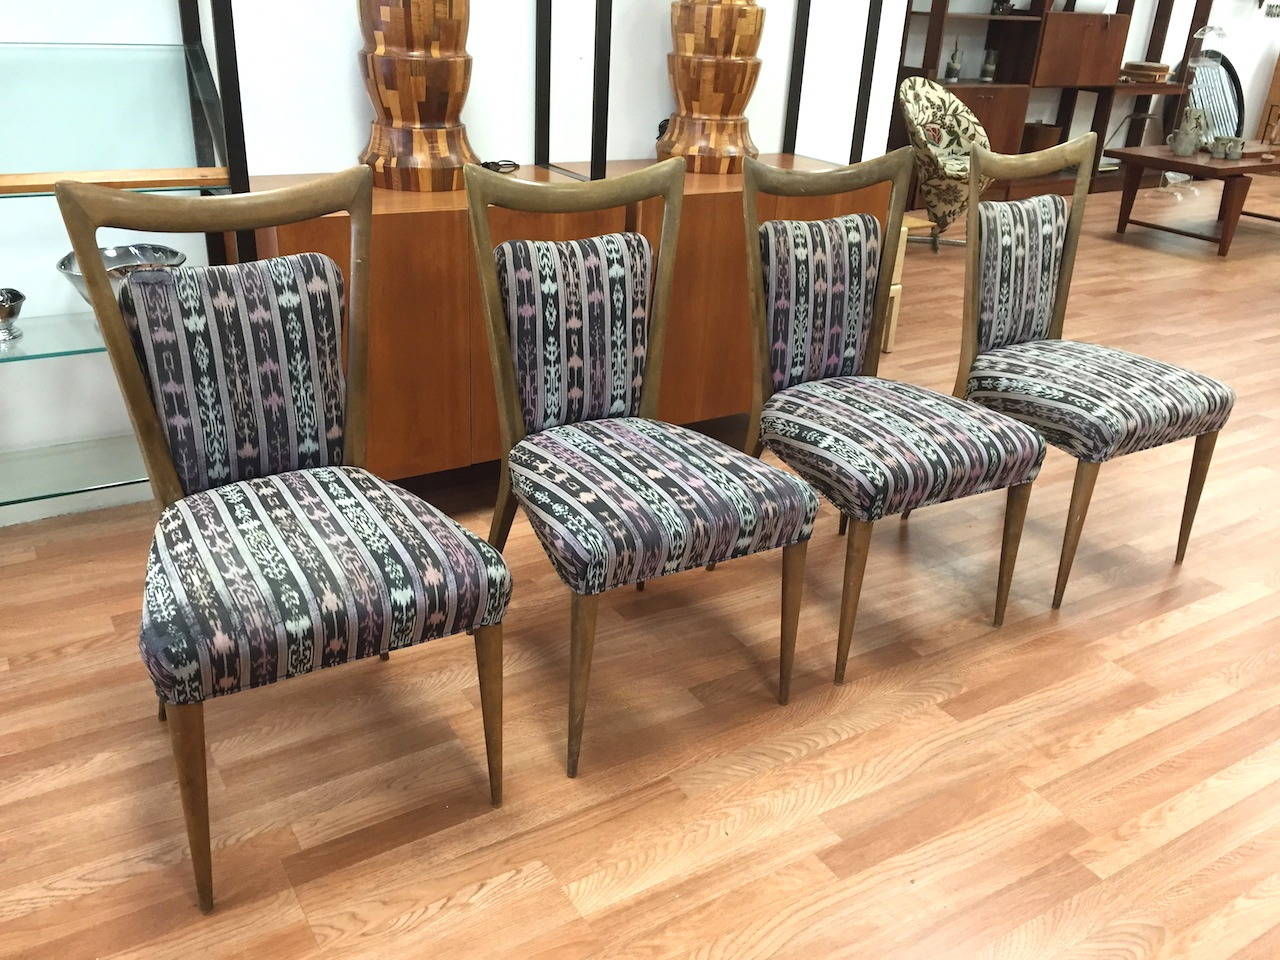 Set of 4 Dining Chairs by Melchiorre Bega.  In original as found condition for restoration.  Matching dining table with 3 leaves also available.